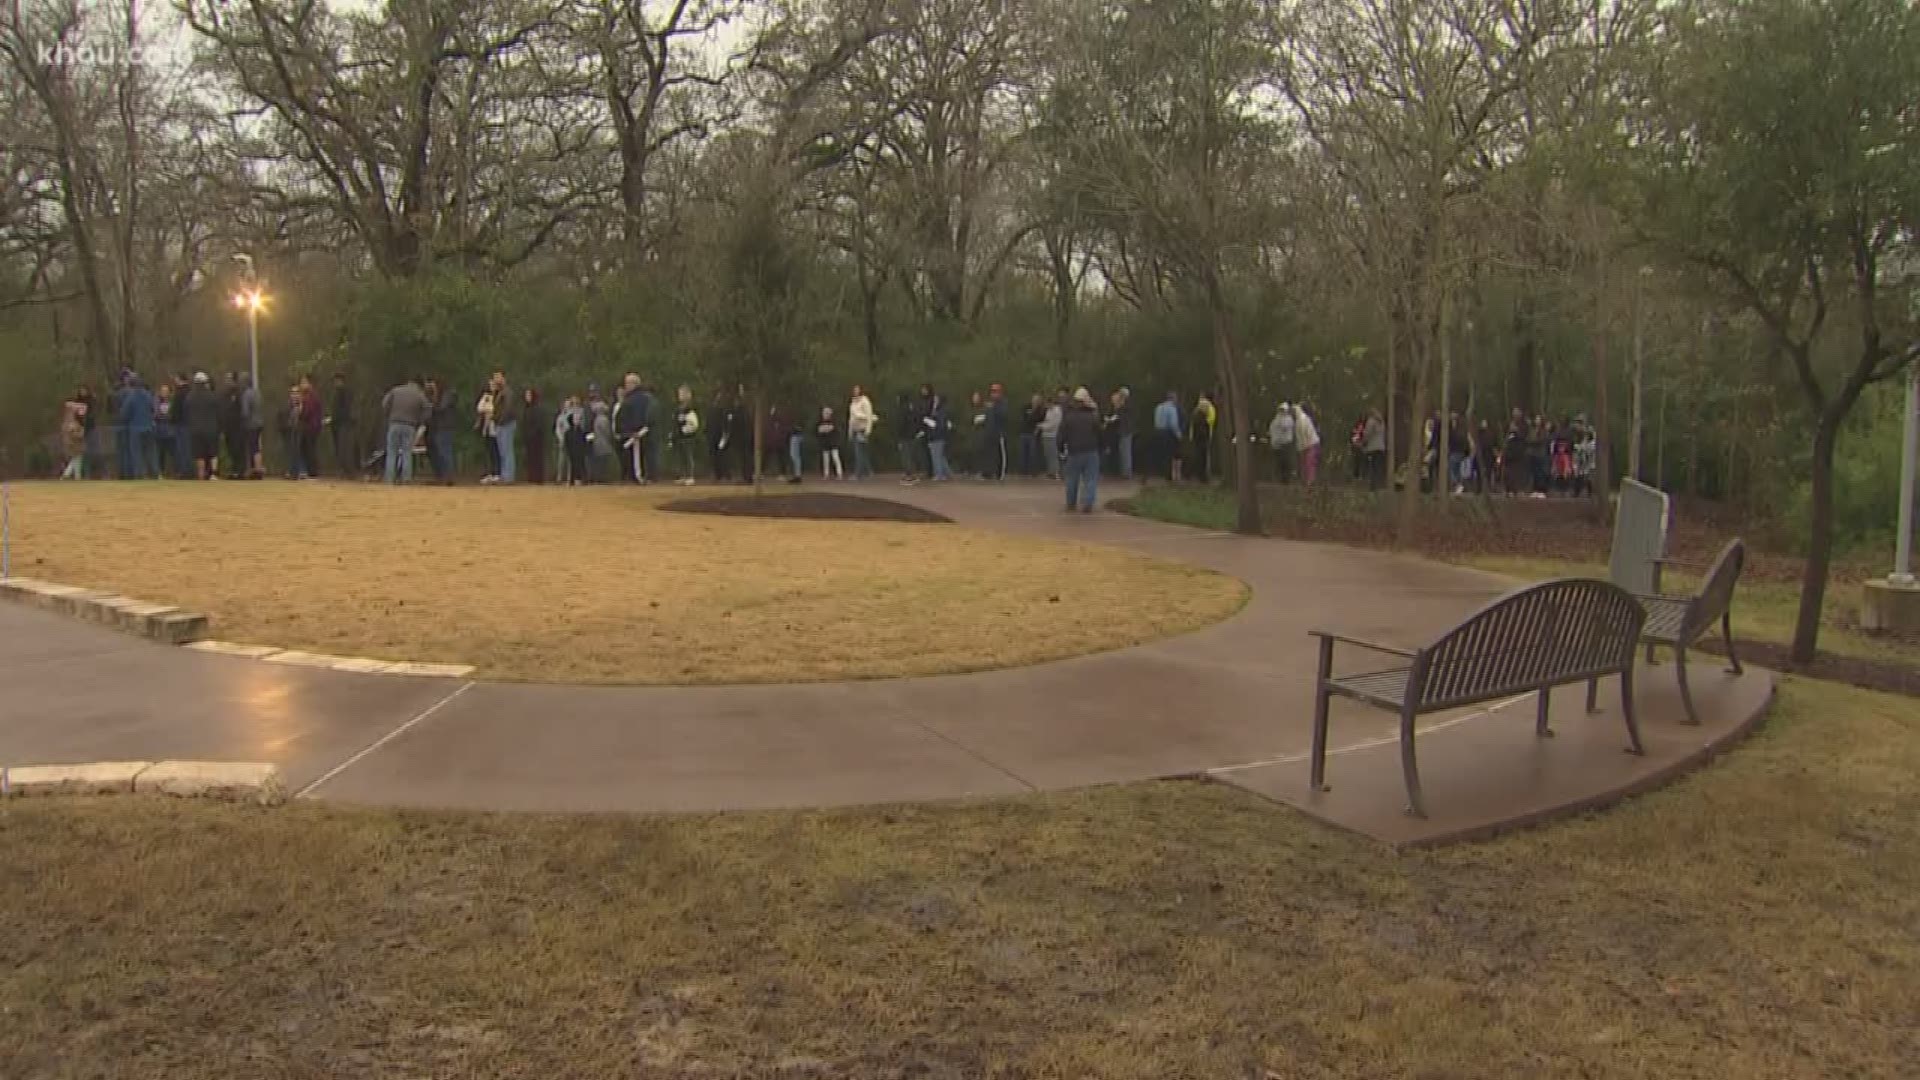 There was a line of people waiting to visit the grave site of President George H.W. Bush on Saturday. It was the first day it was open to the public.